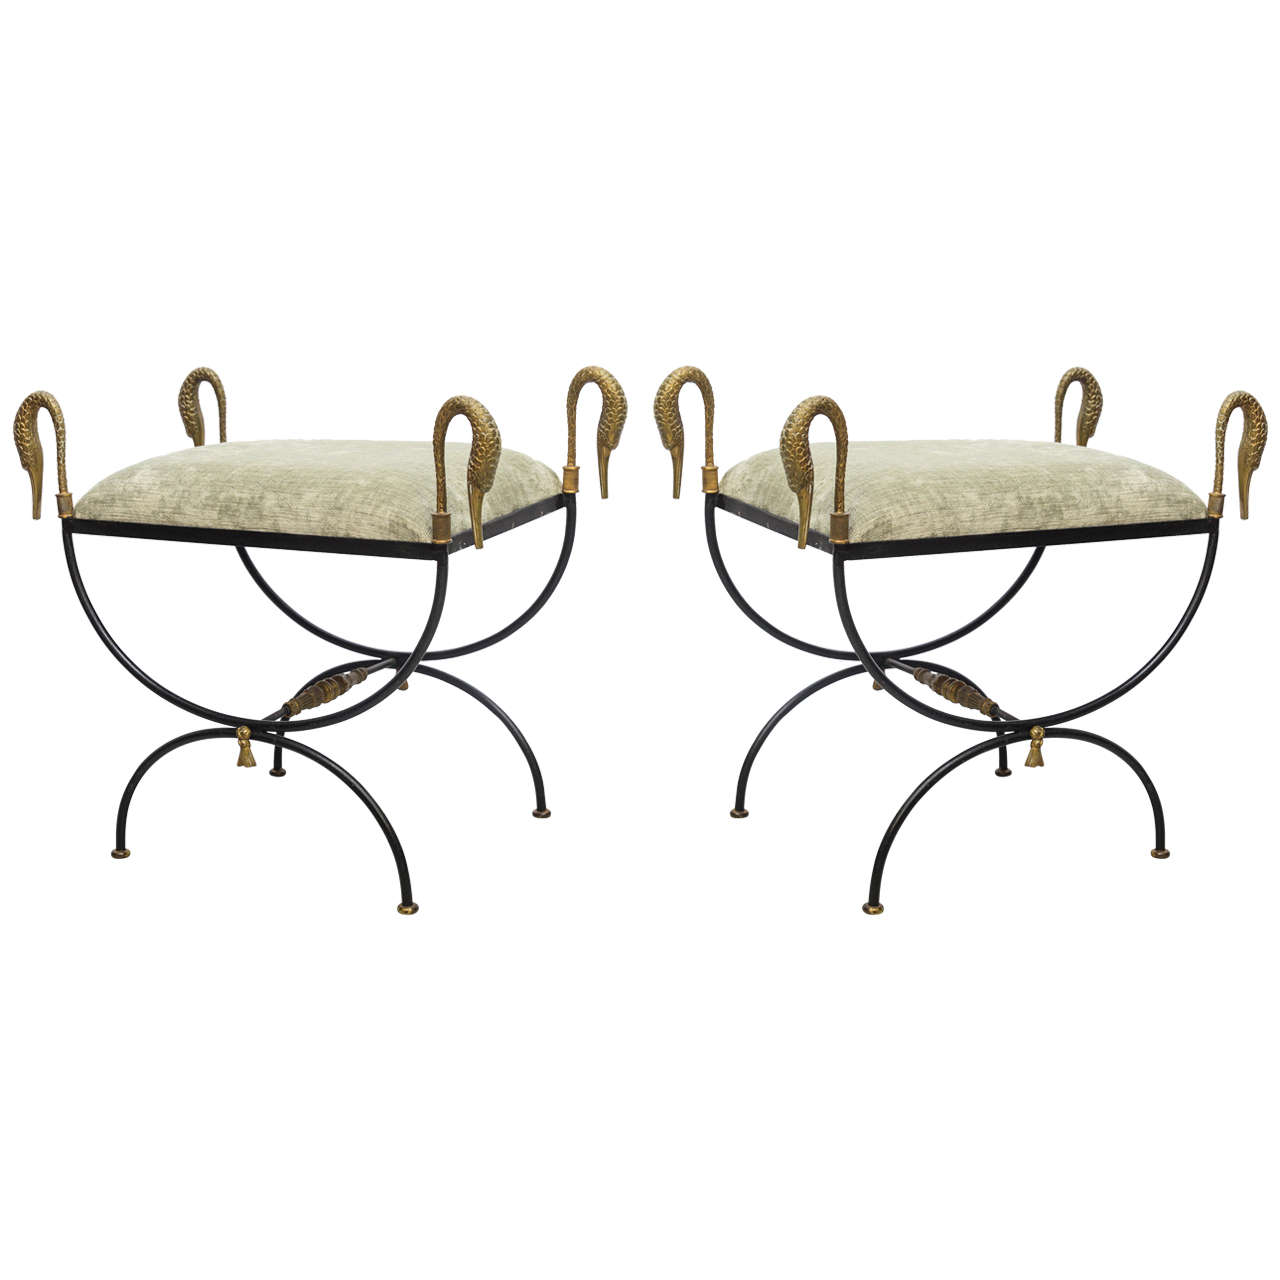 Pair of Neoclassical Iron and Bronze Swan Benches